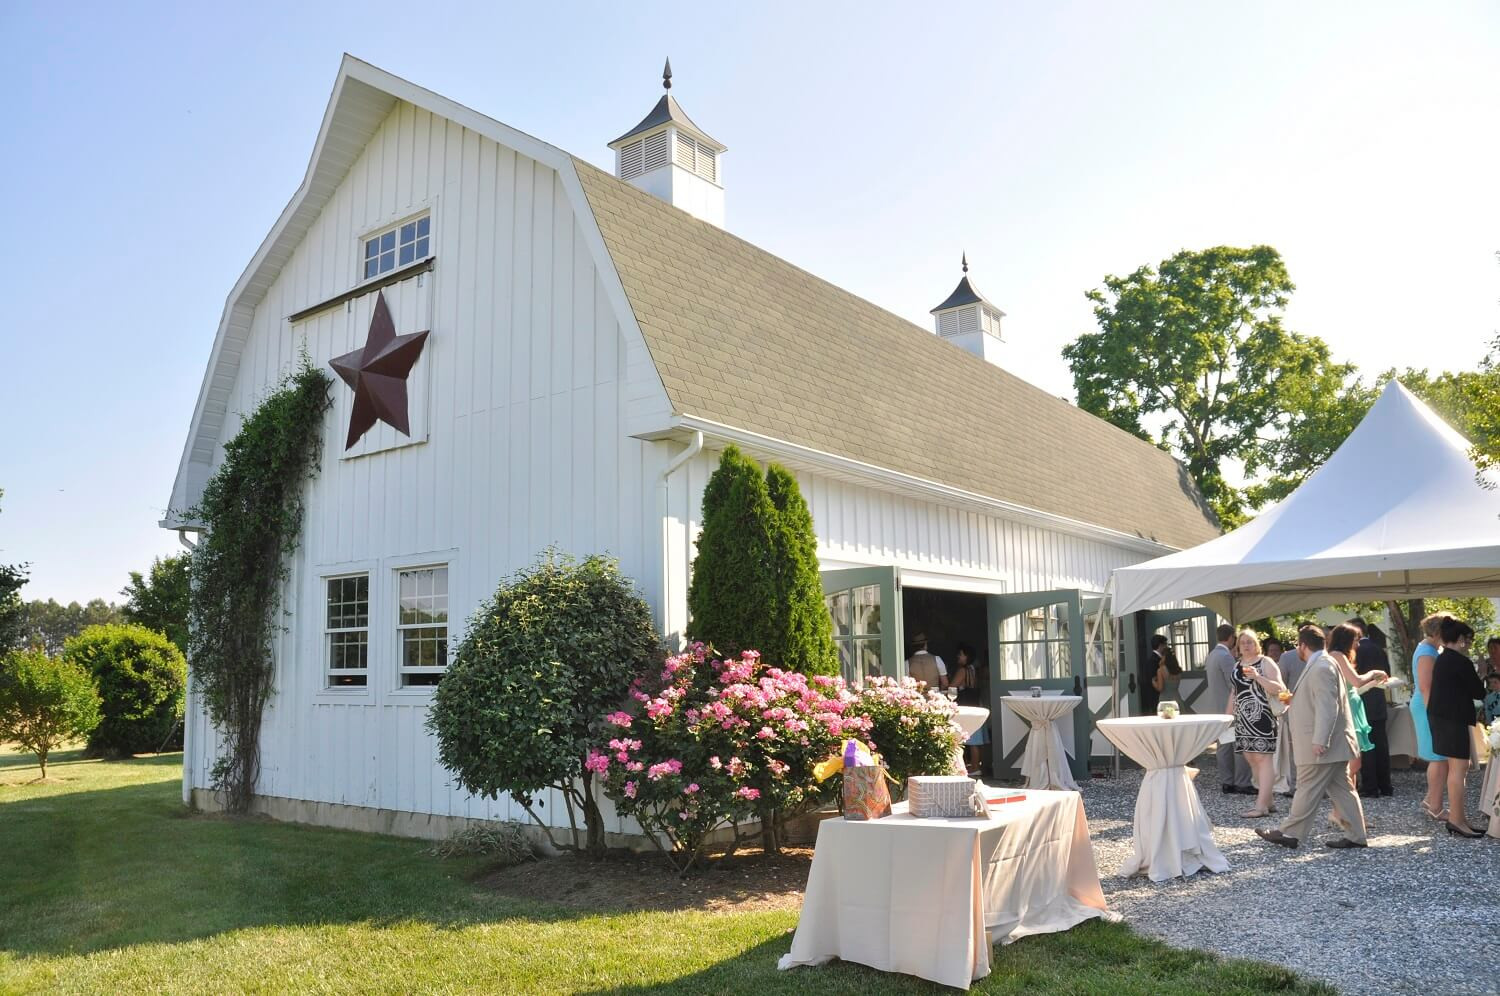  Wedding Venues Eastern Shore Md in the world Check it out now 